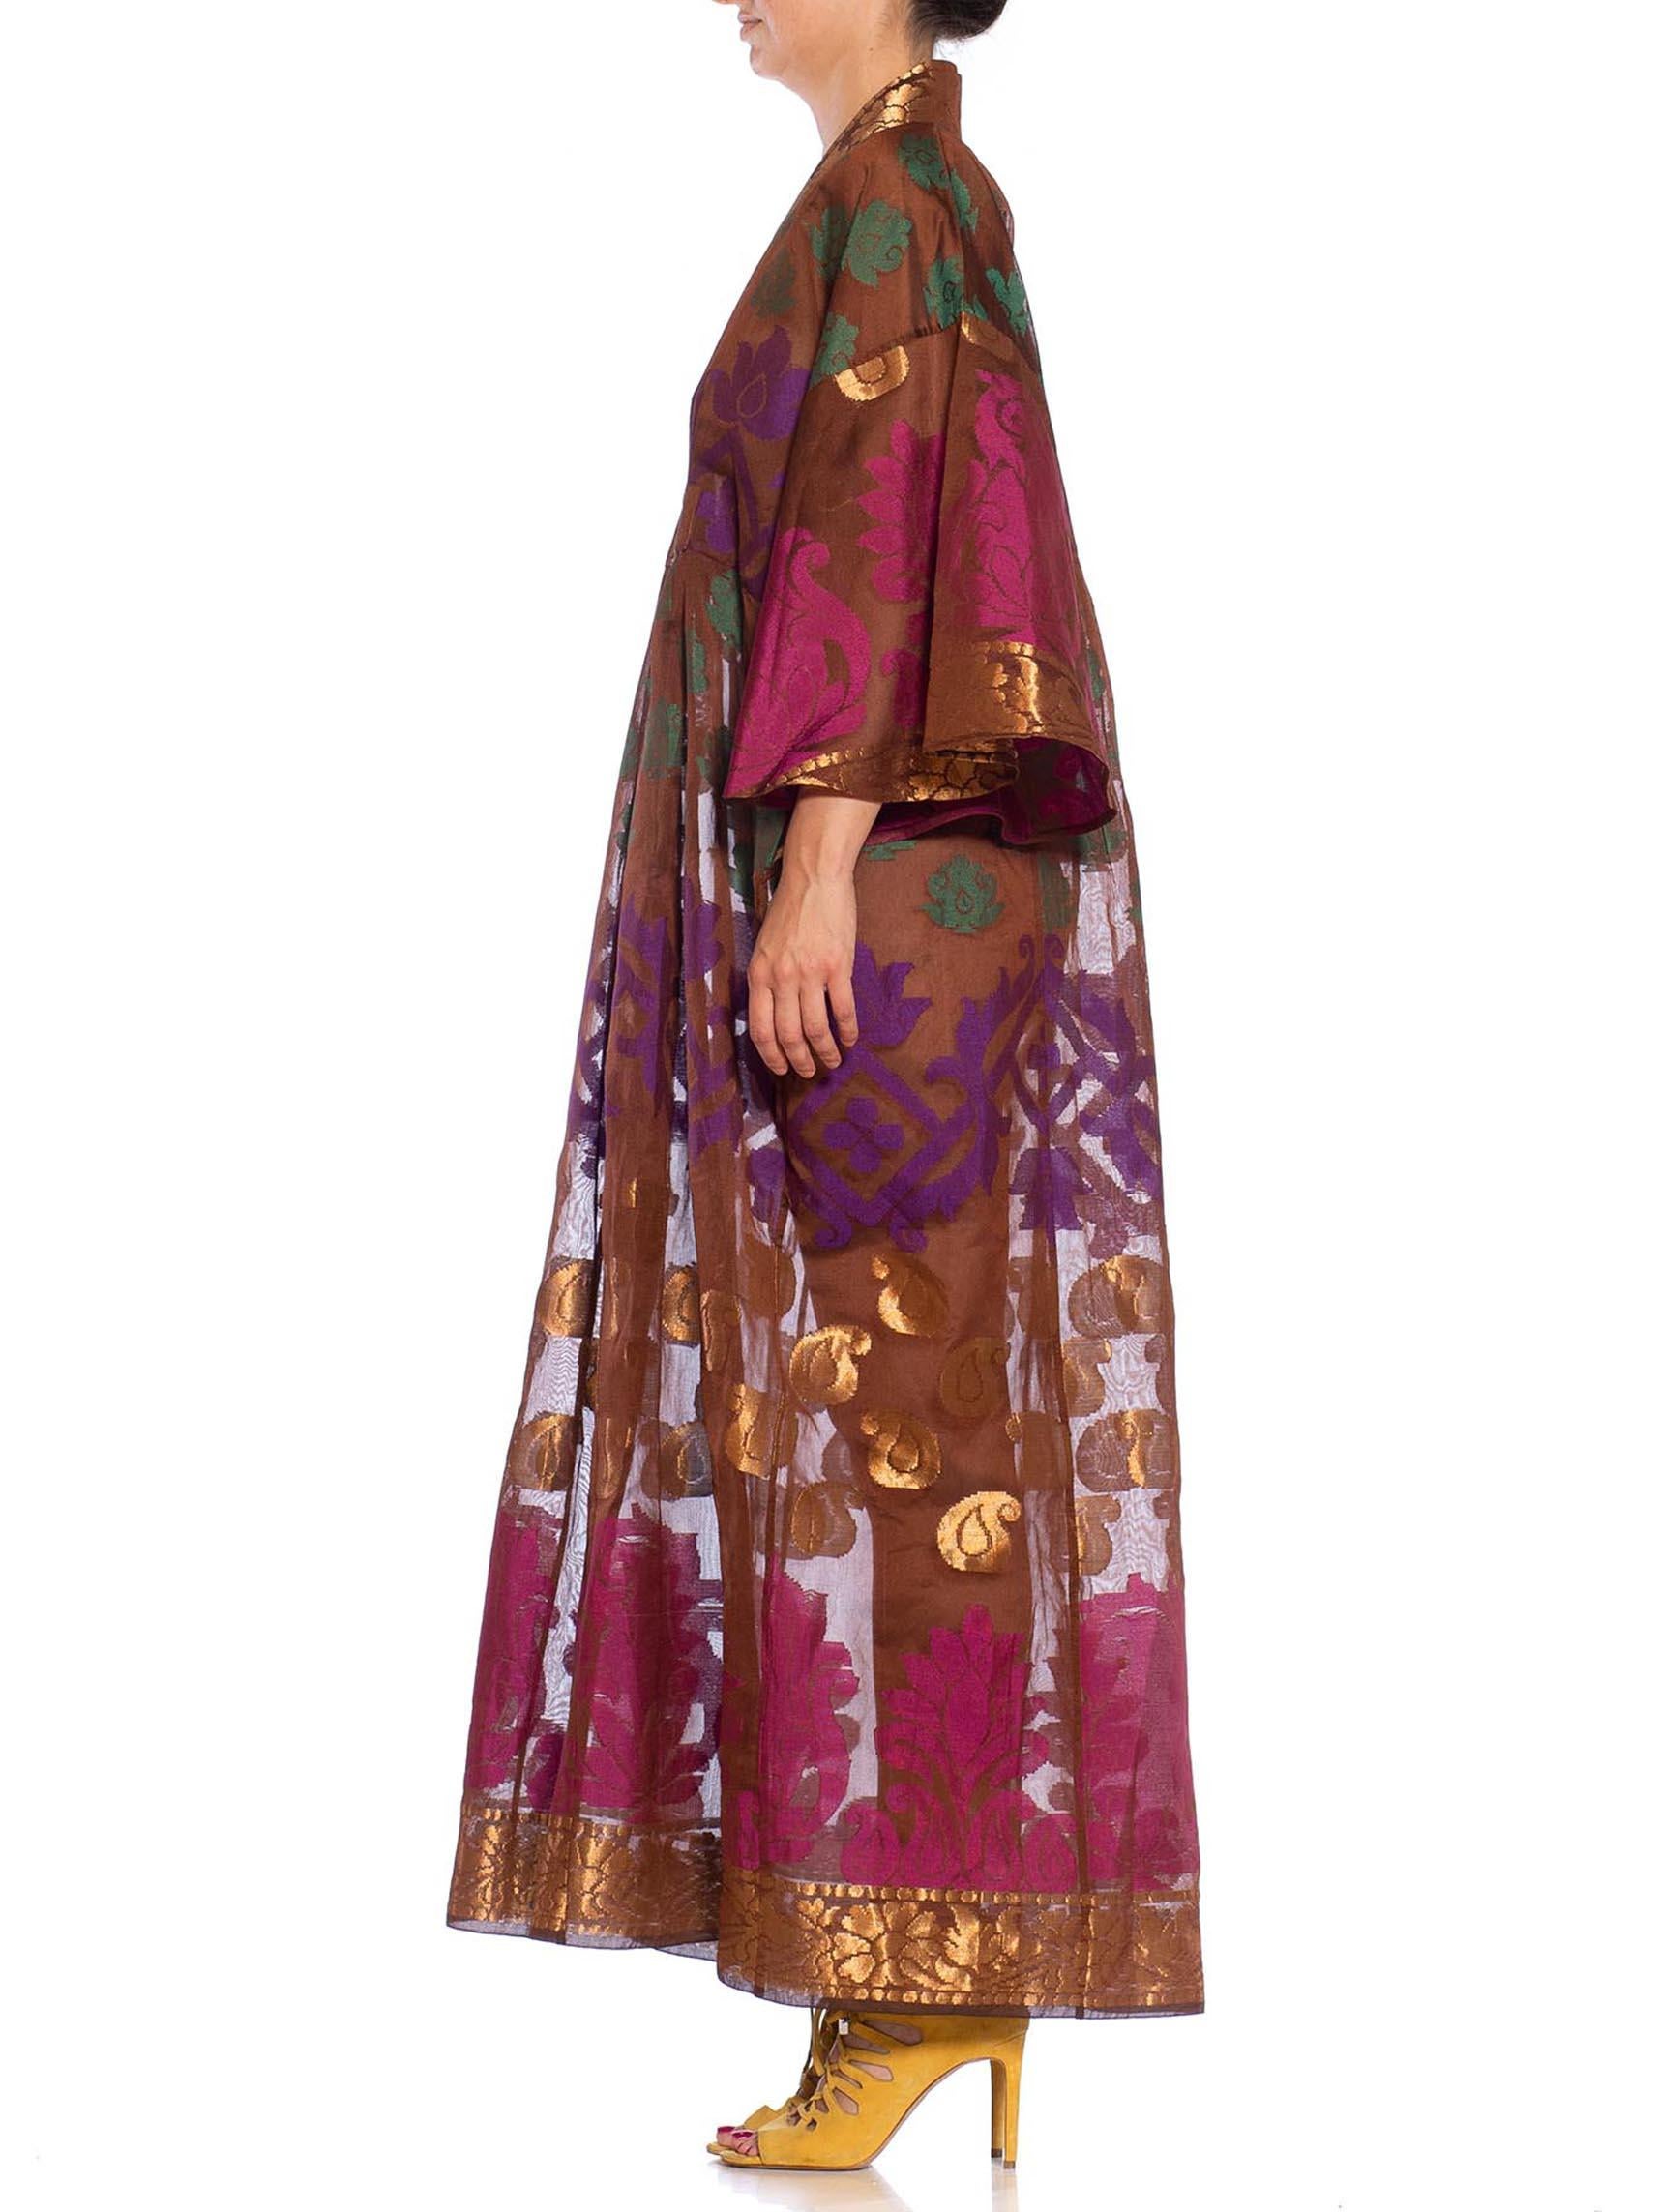 MORPHEW COLLECTION Chocolate Brown Metallic Multi  Silk Kaftan Made From Vintage Saris
MORPHEW COLLECTION is made entirely by hand in our NYC Ateliér of rare antique materials sourced from around the globe. Our sustainable vintage materials